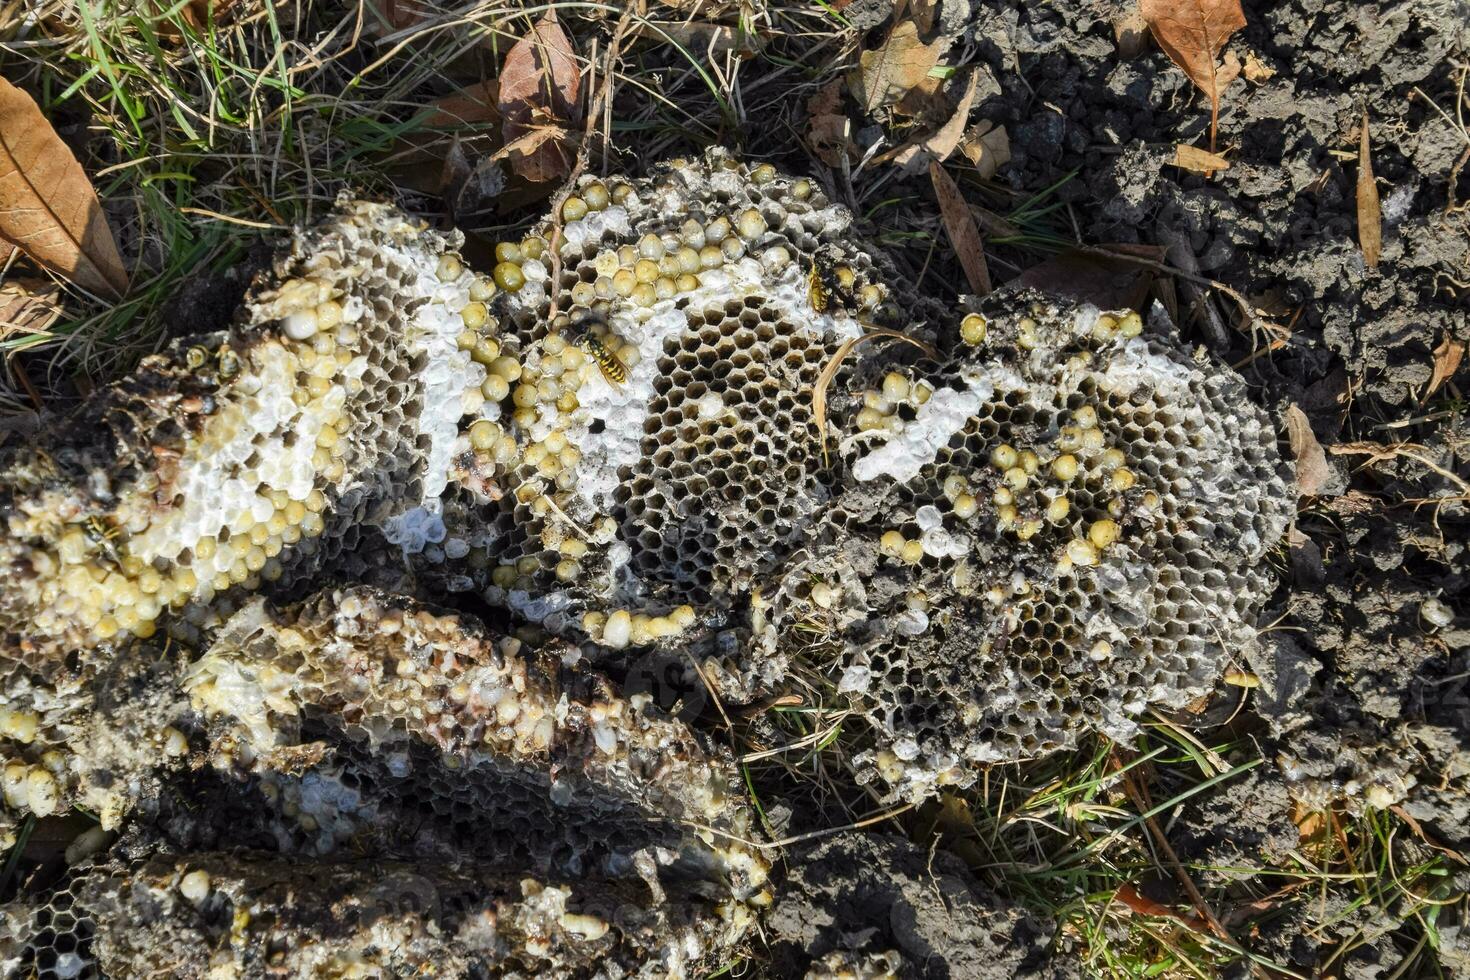 Destroyed hornet's nest. Drawn on the surface of a honeycomb hornet's nest. Larvae and pupae of wasps. Vespula vulgaris photo